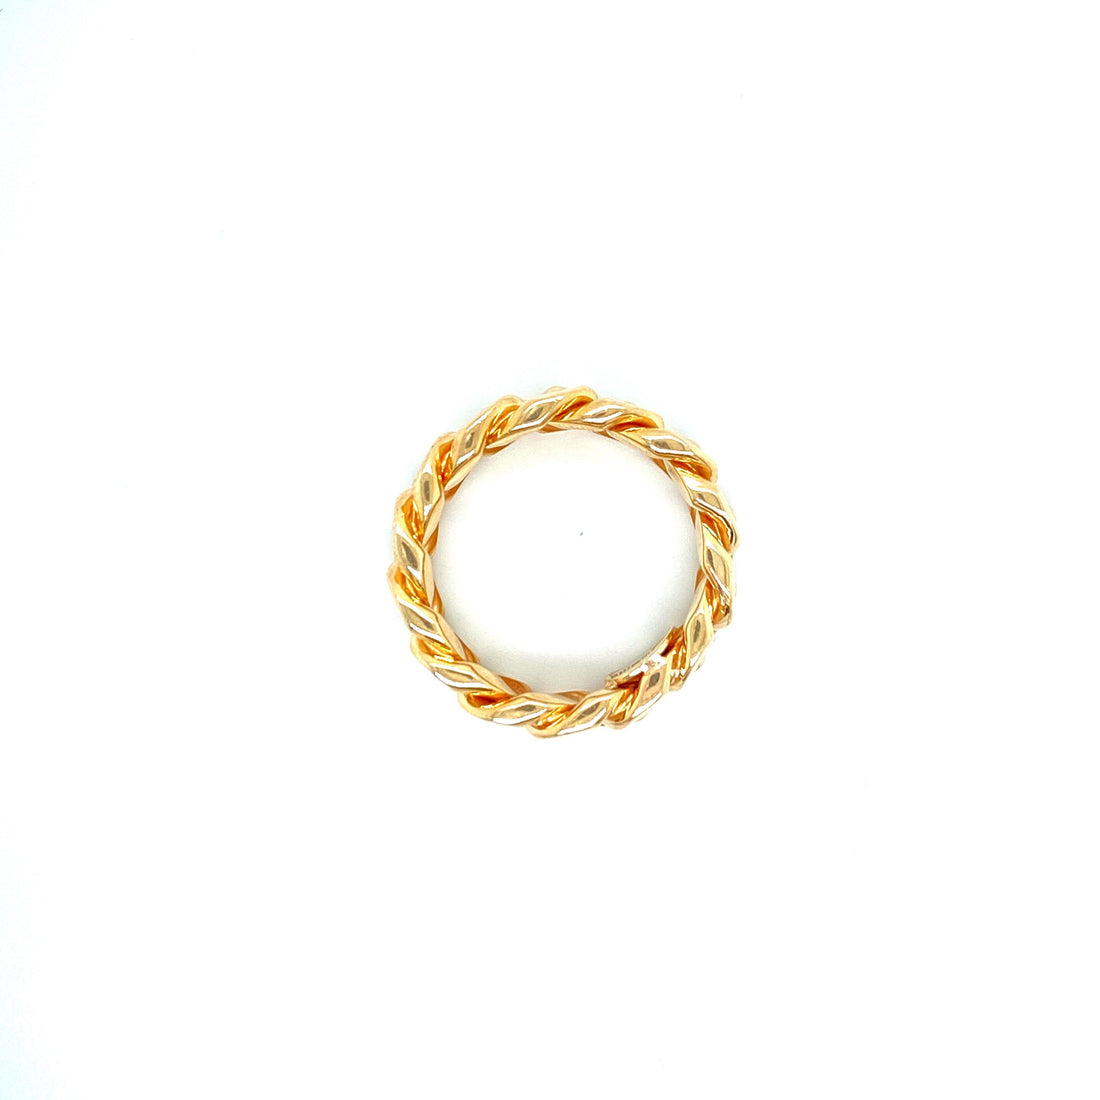 10K SOLID YELLOW GOLD MIAMI CUBAN RING 8MM SIZE 9 - Appelt&